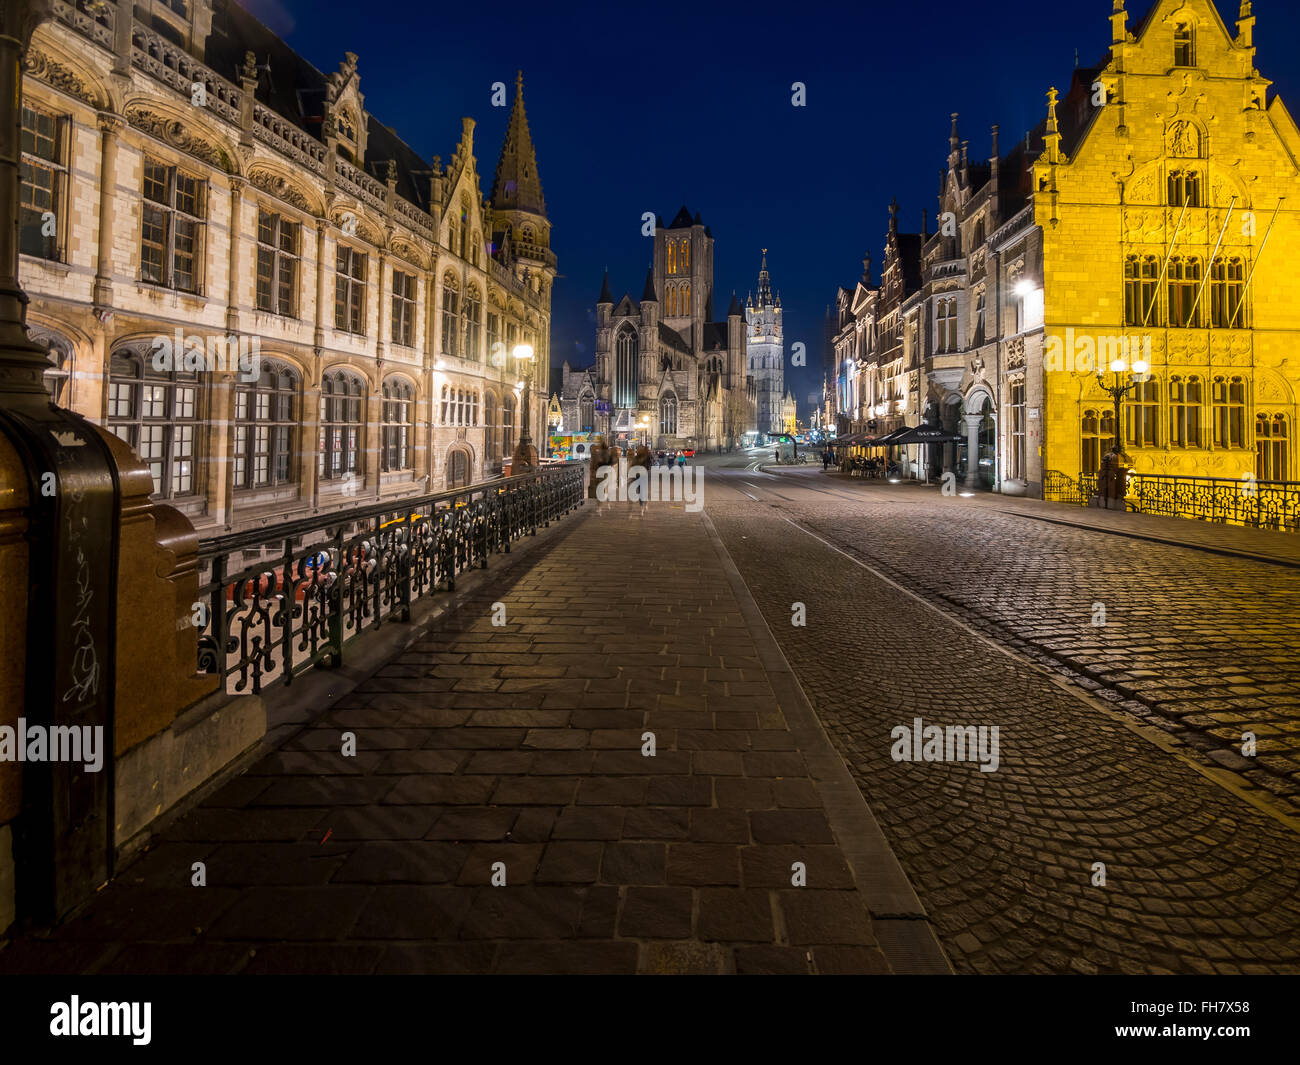 Belgium, Ghent, old town with St. Nicholas' Church and belfry at night Stock Photo